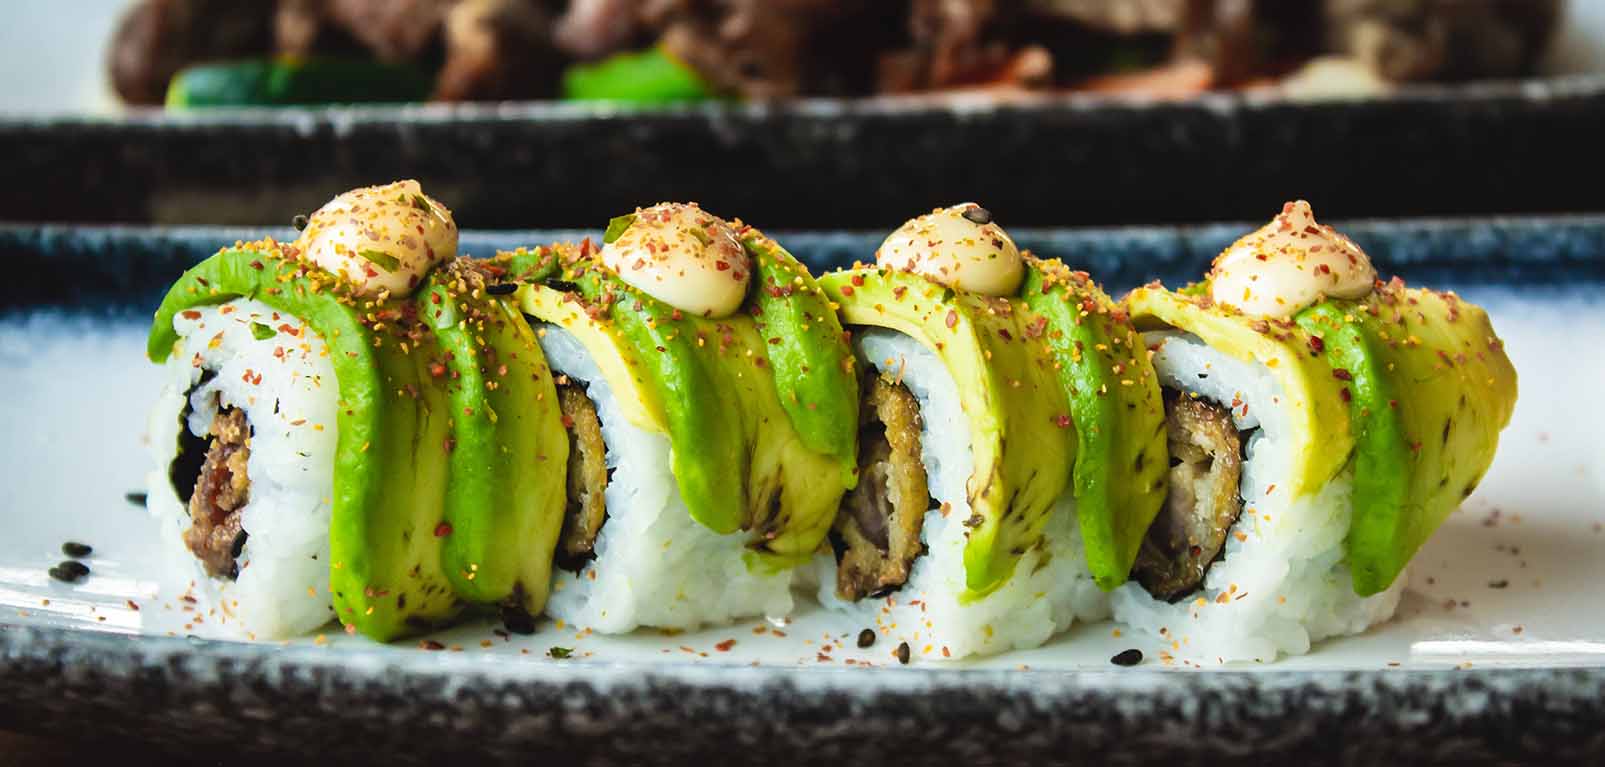 restaurant sushi with rice, avocado, seeds and sauces on a plate